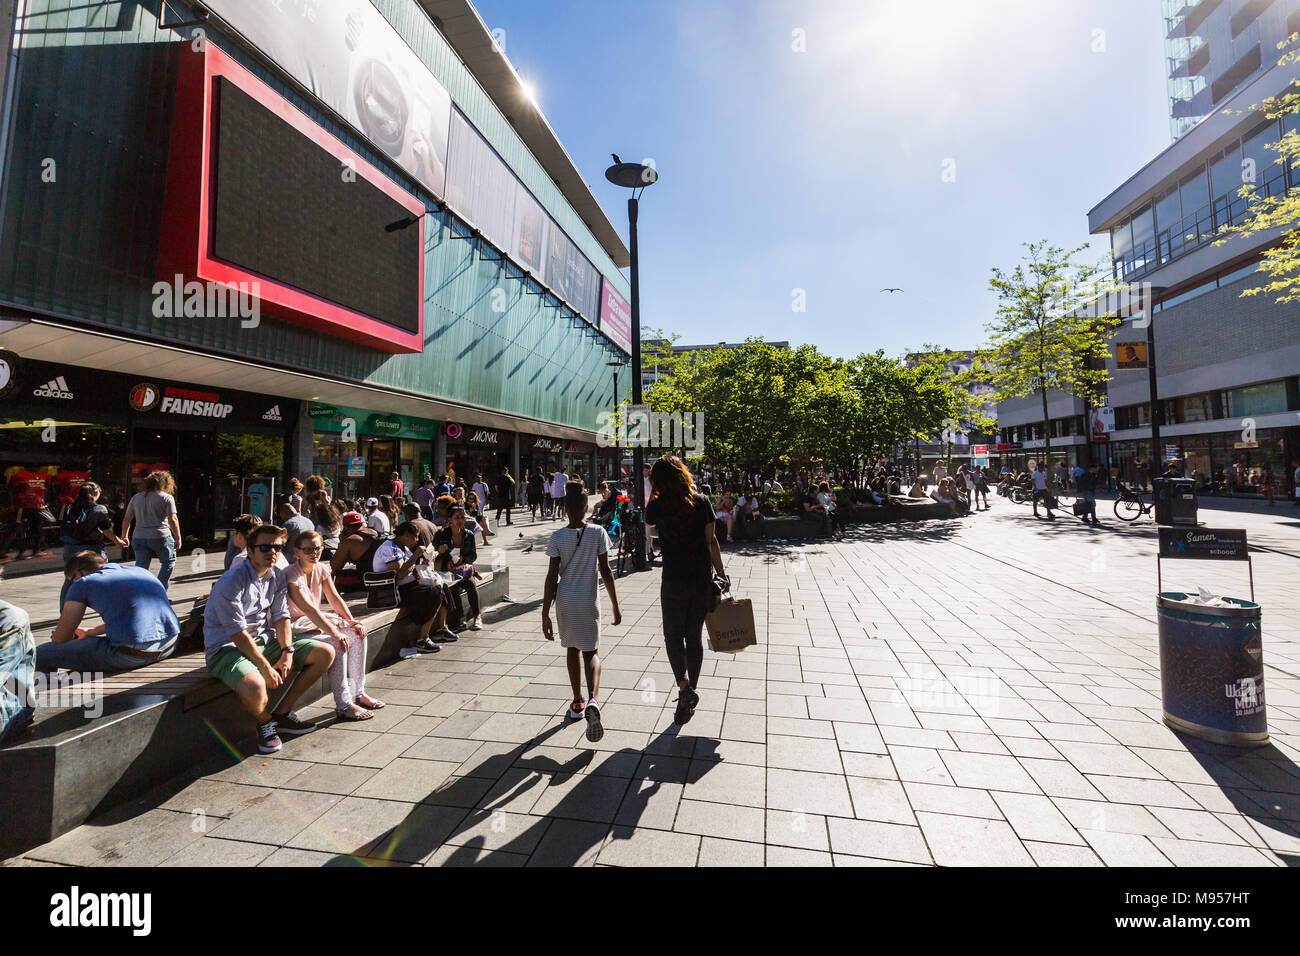 ROTTERDAM, NETHERLANDS - MAY 25, 2017: View of people shopping at the shopping street Binnenwegplein and Lijnbaan on May 25, 2017. Its located in the  Stock Photo